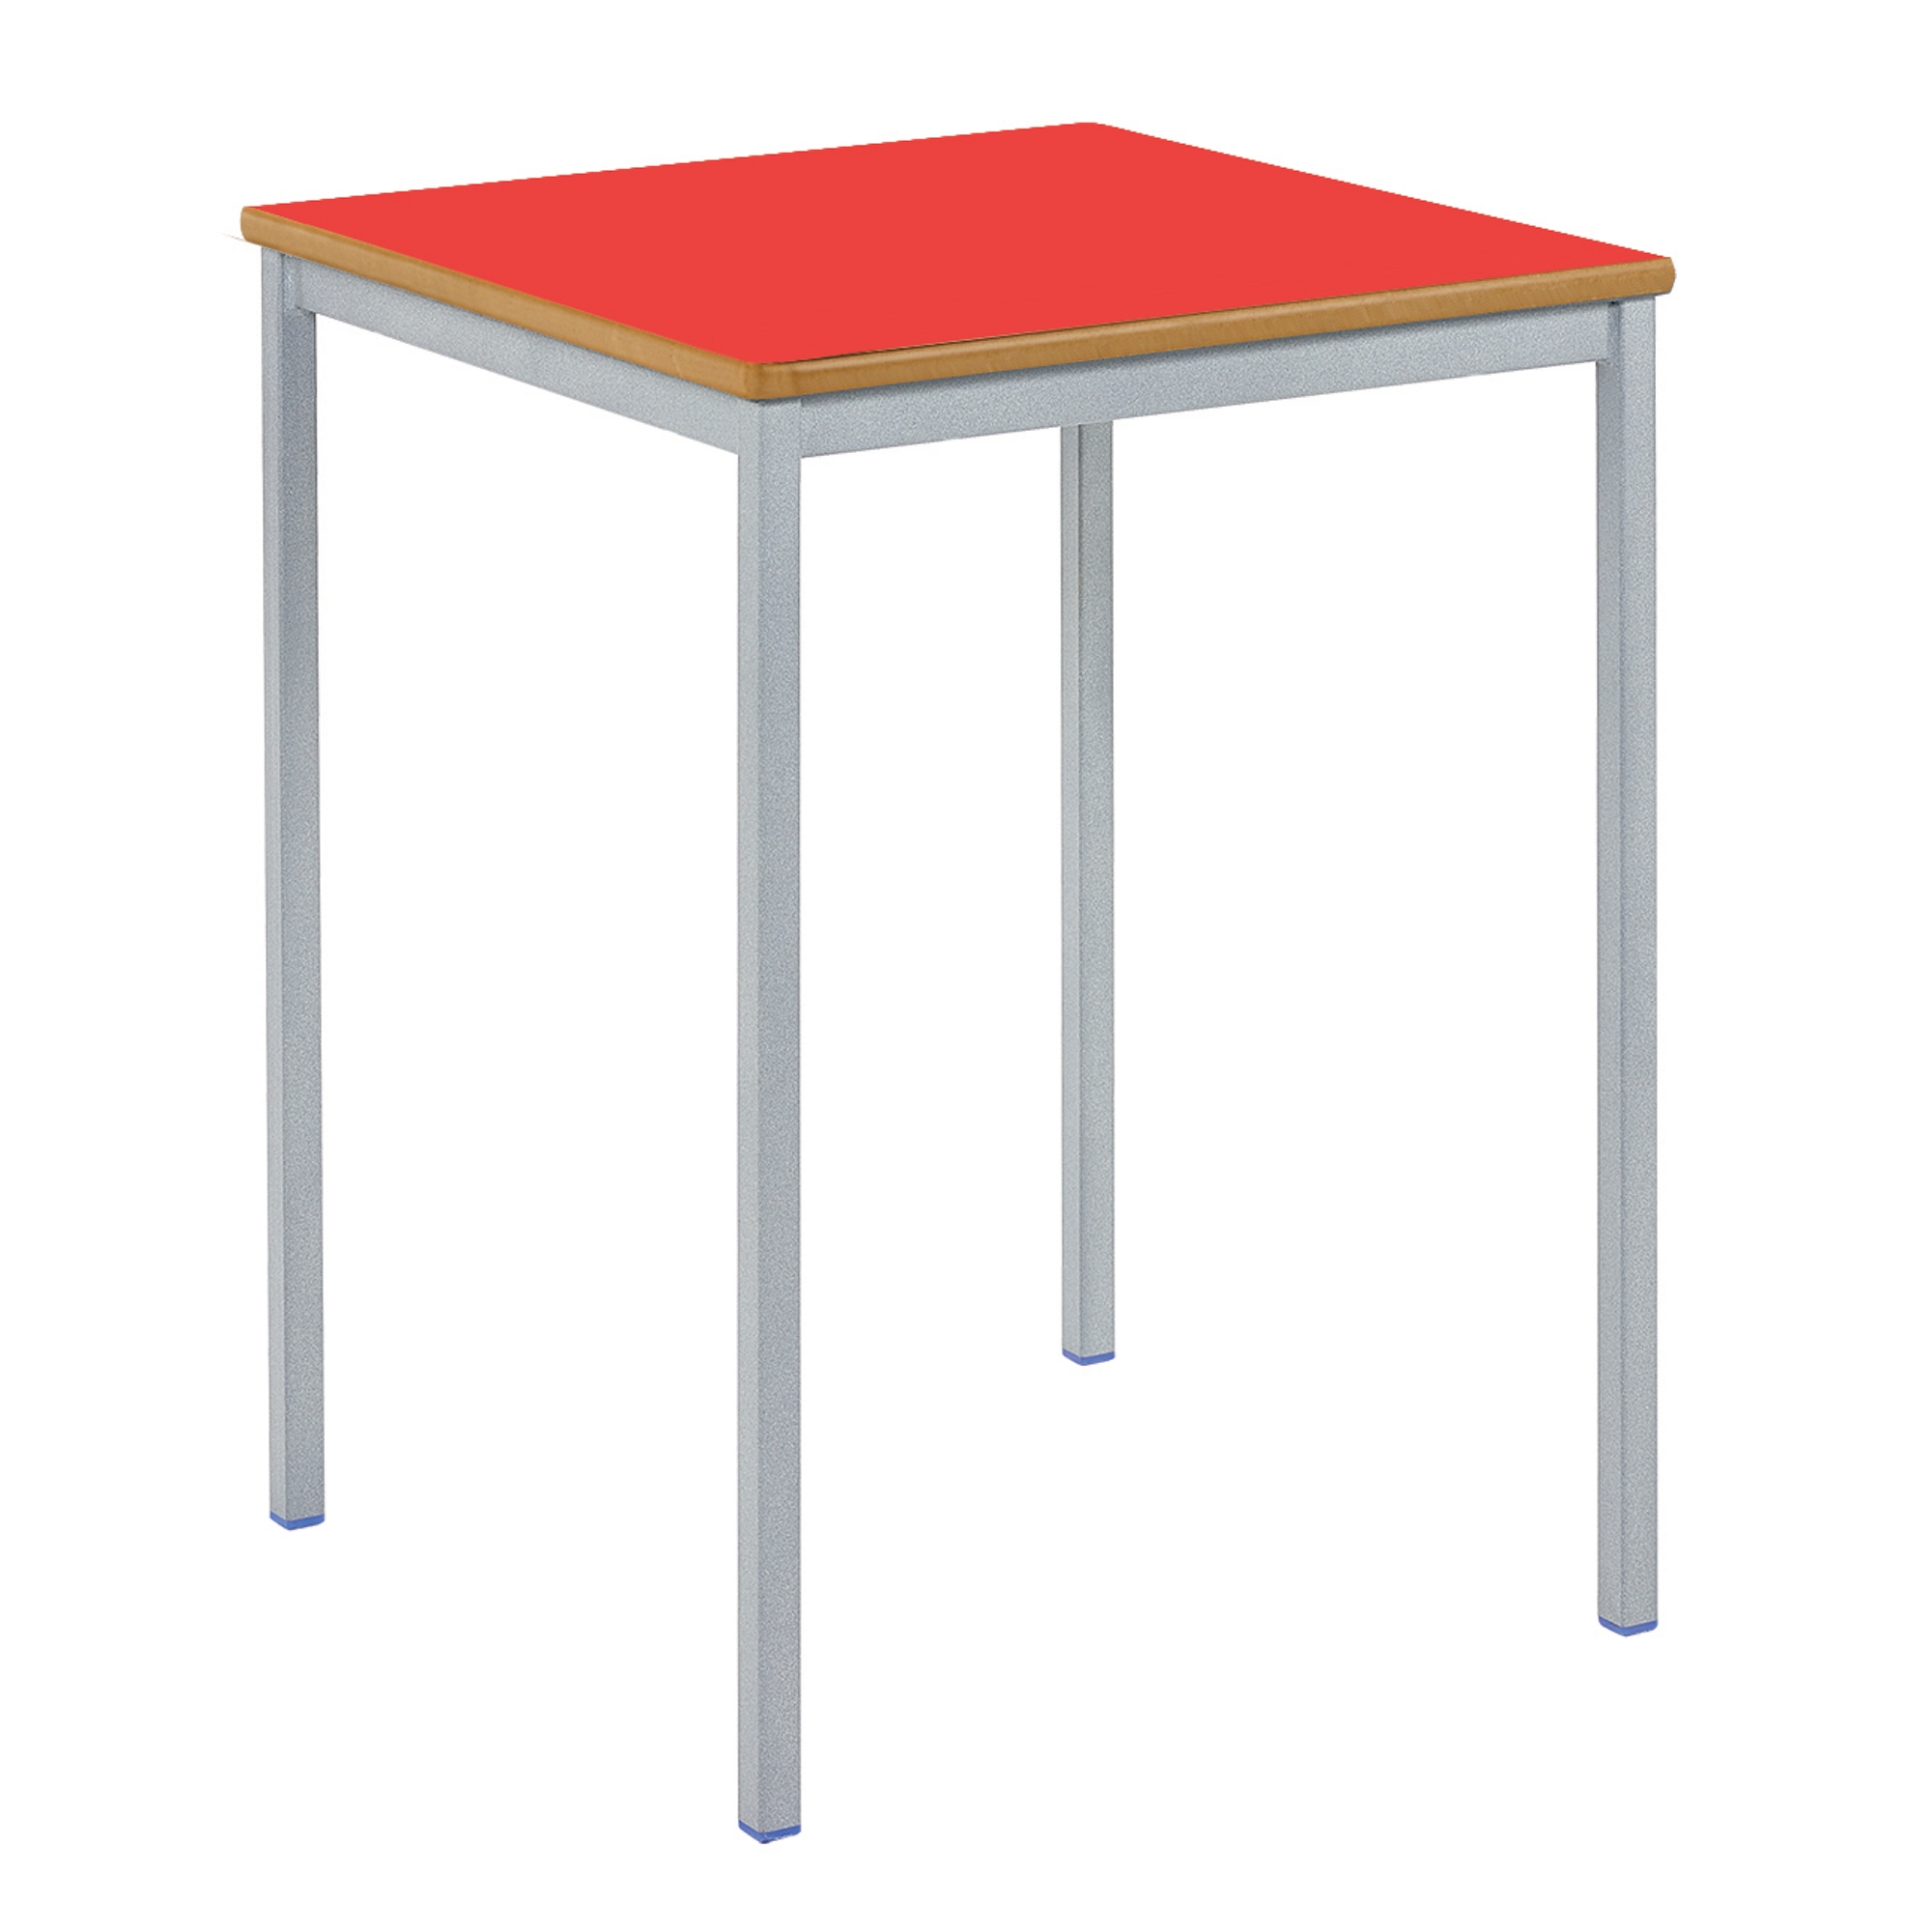 Classmates Square Fully Welded Classroom Table - 600 x 600 x 760mm - Red